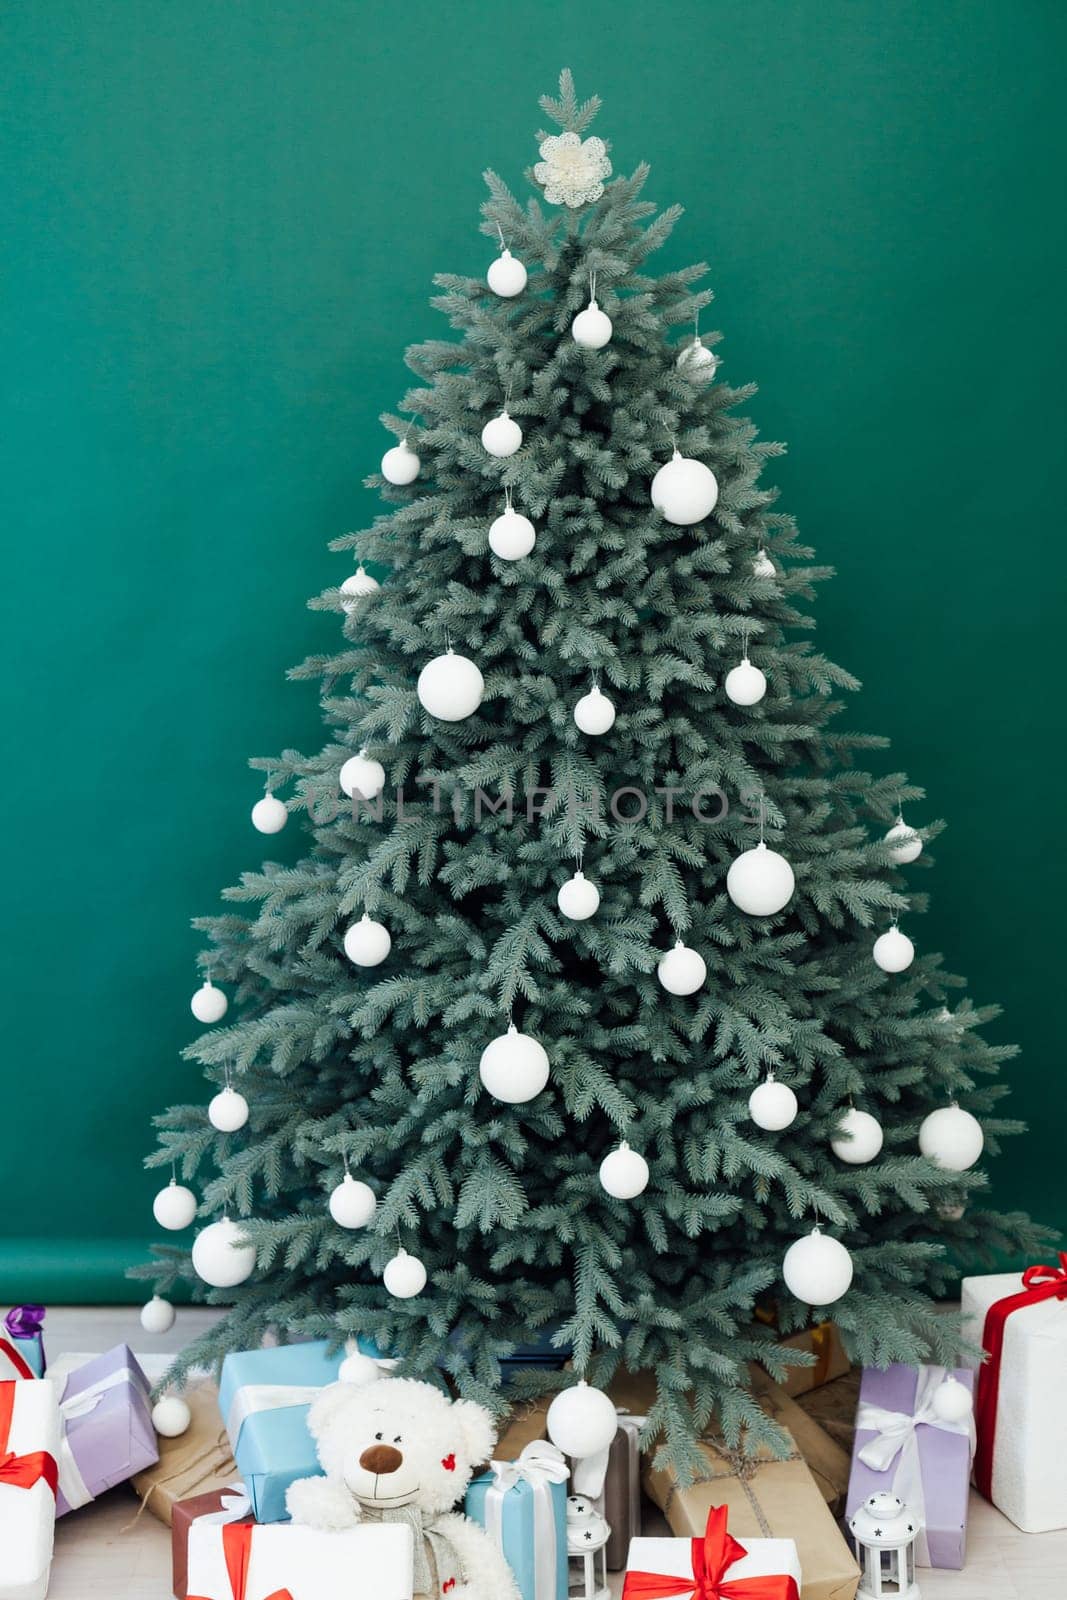 New Year's Christmas tree decor with gifts and interior garlands